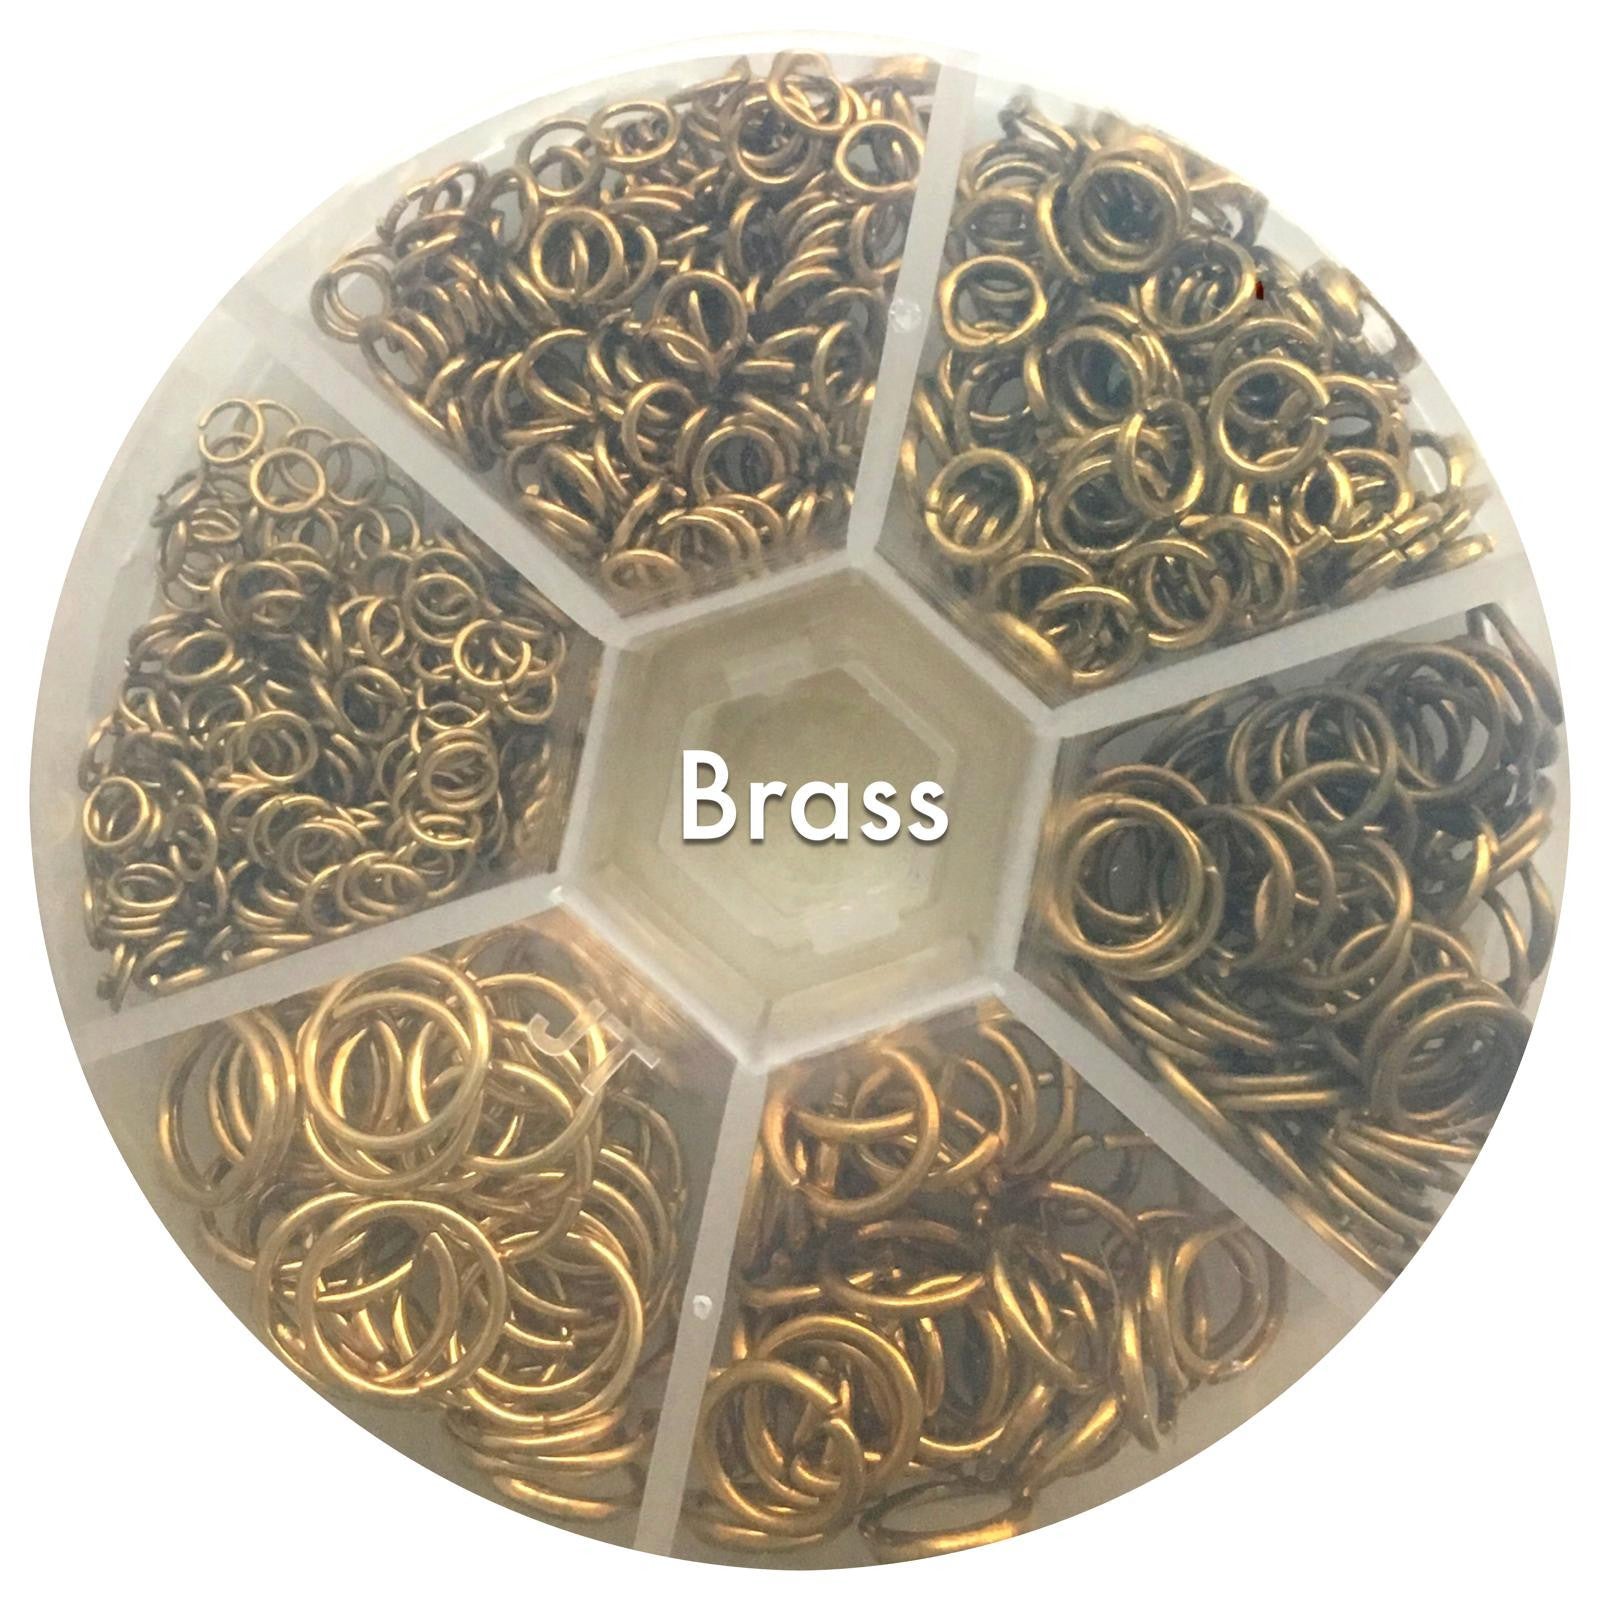 Mixed Pack Jump Rings - Raw Brass - 4mm, 5mm, 6mm, 8mm, 9mm, 10mm